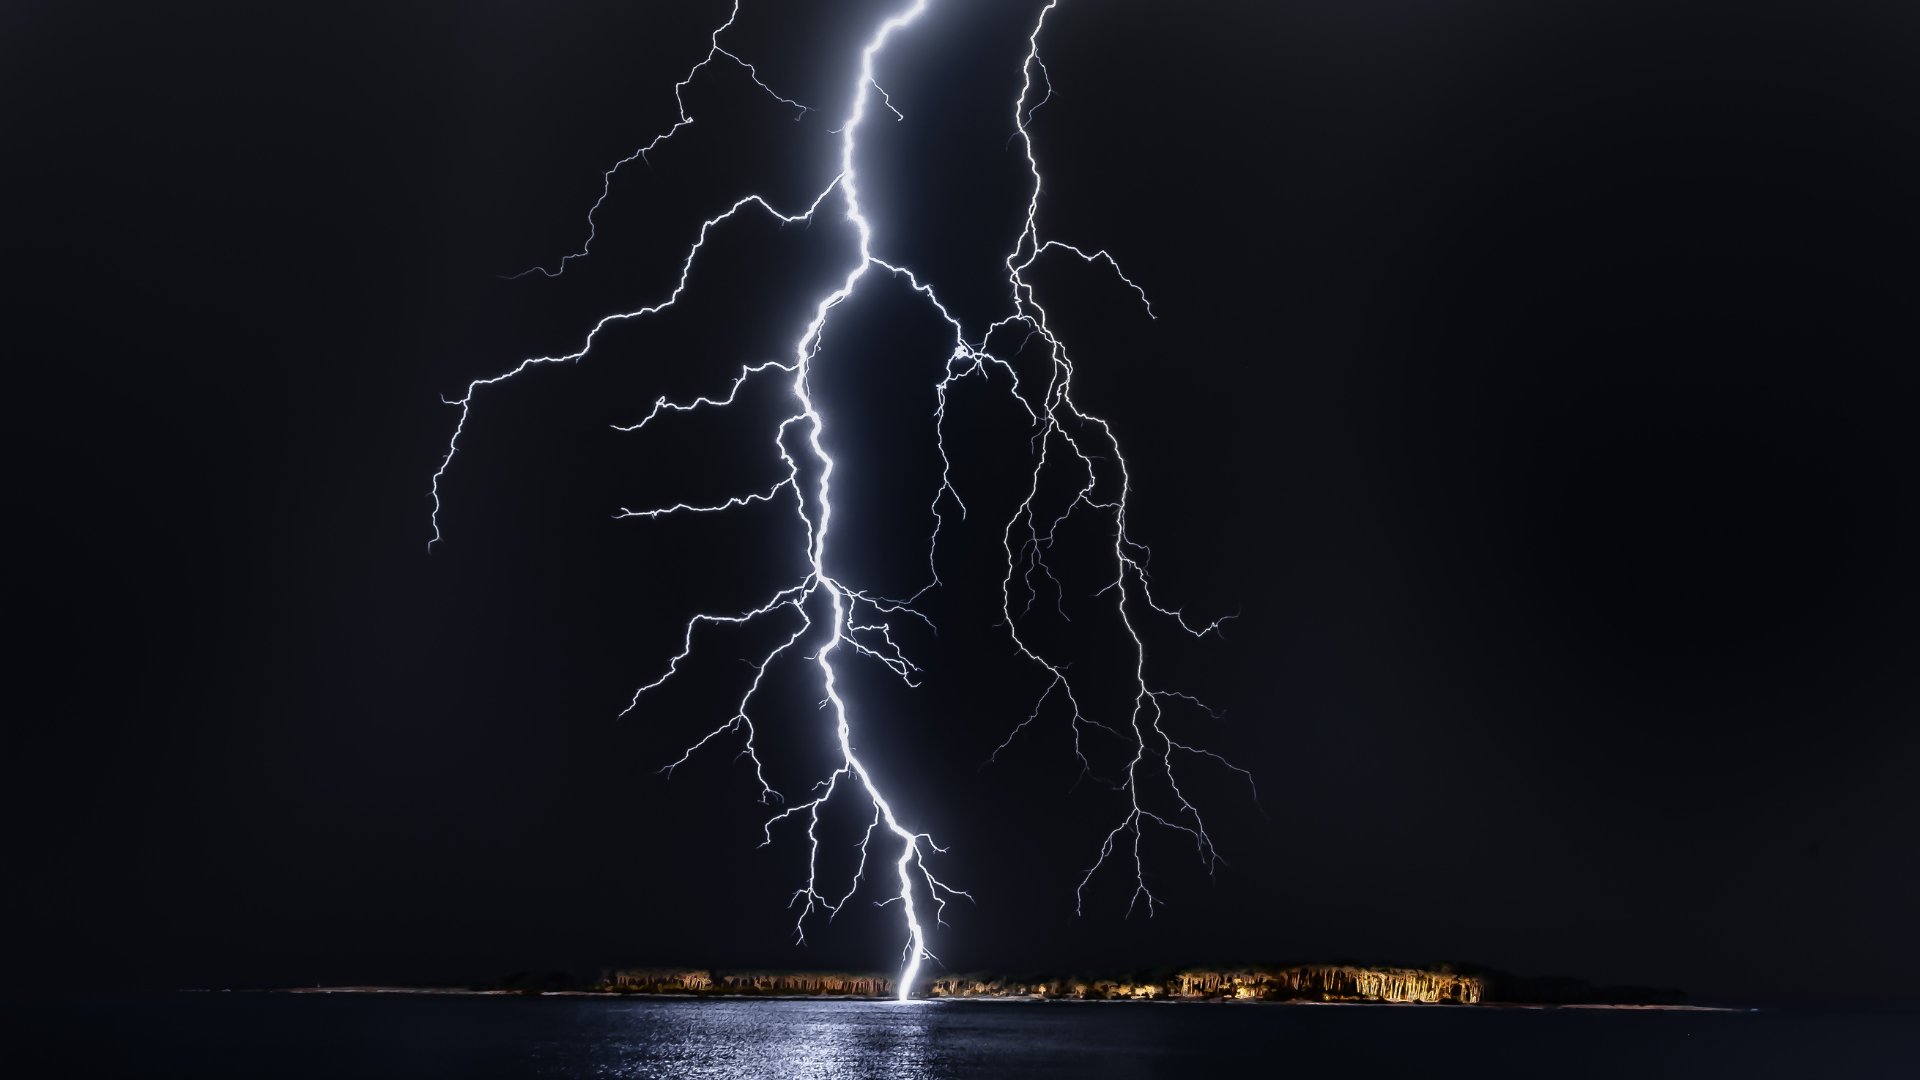 A laser can deflect lightning by simply pointing it at the sky.